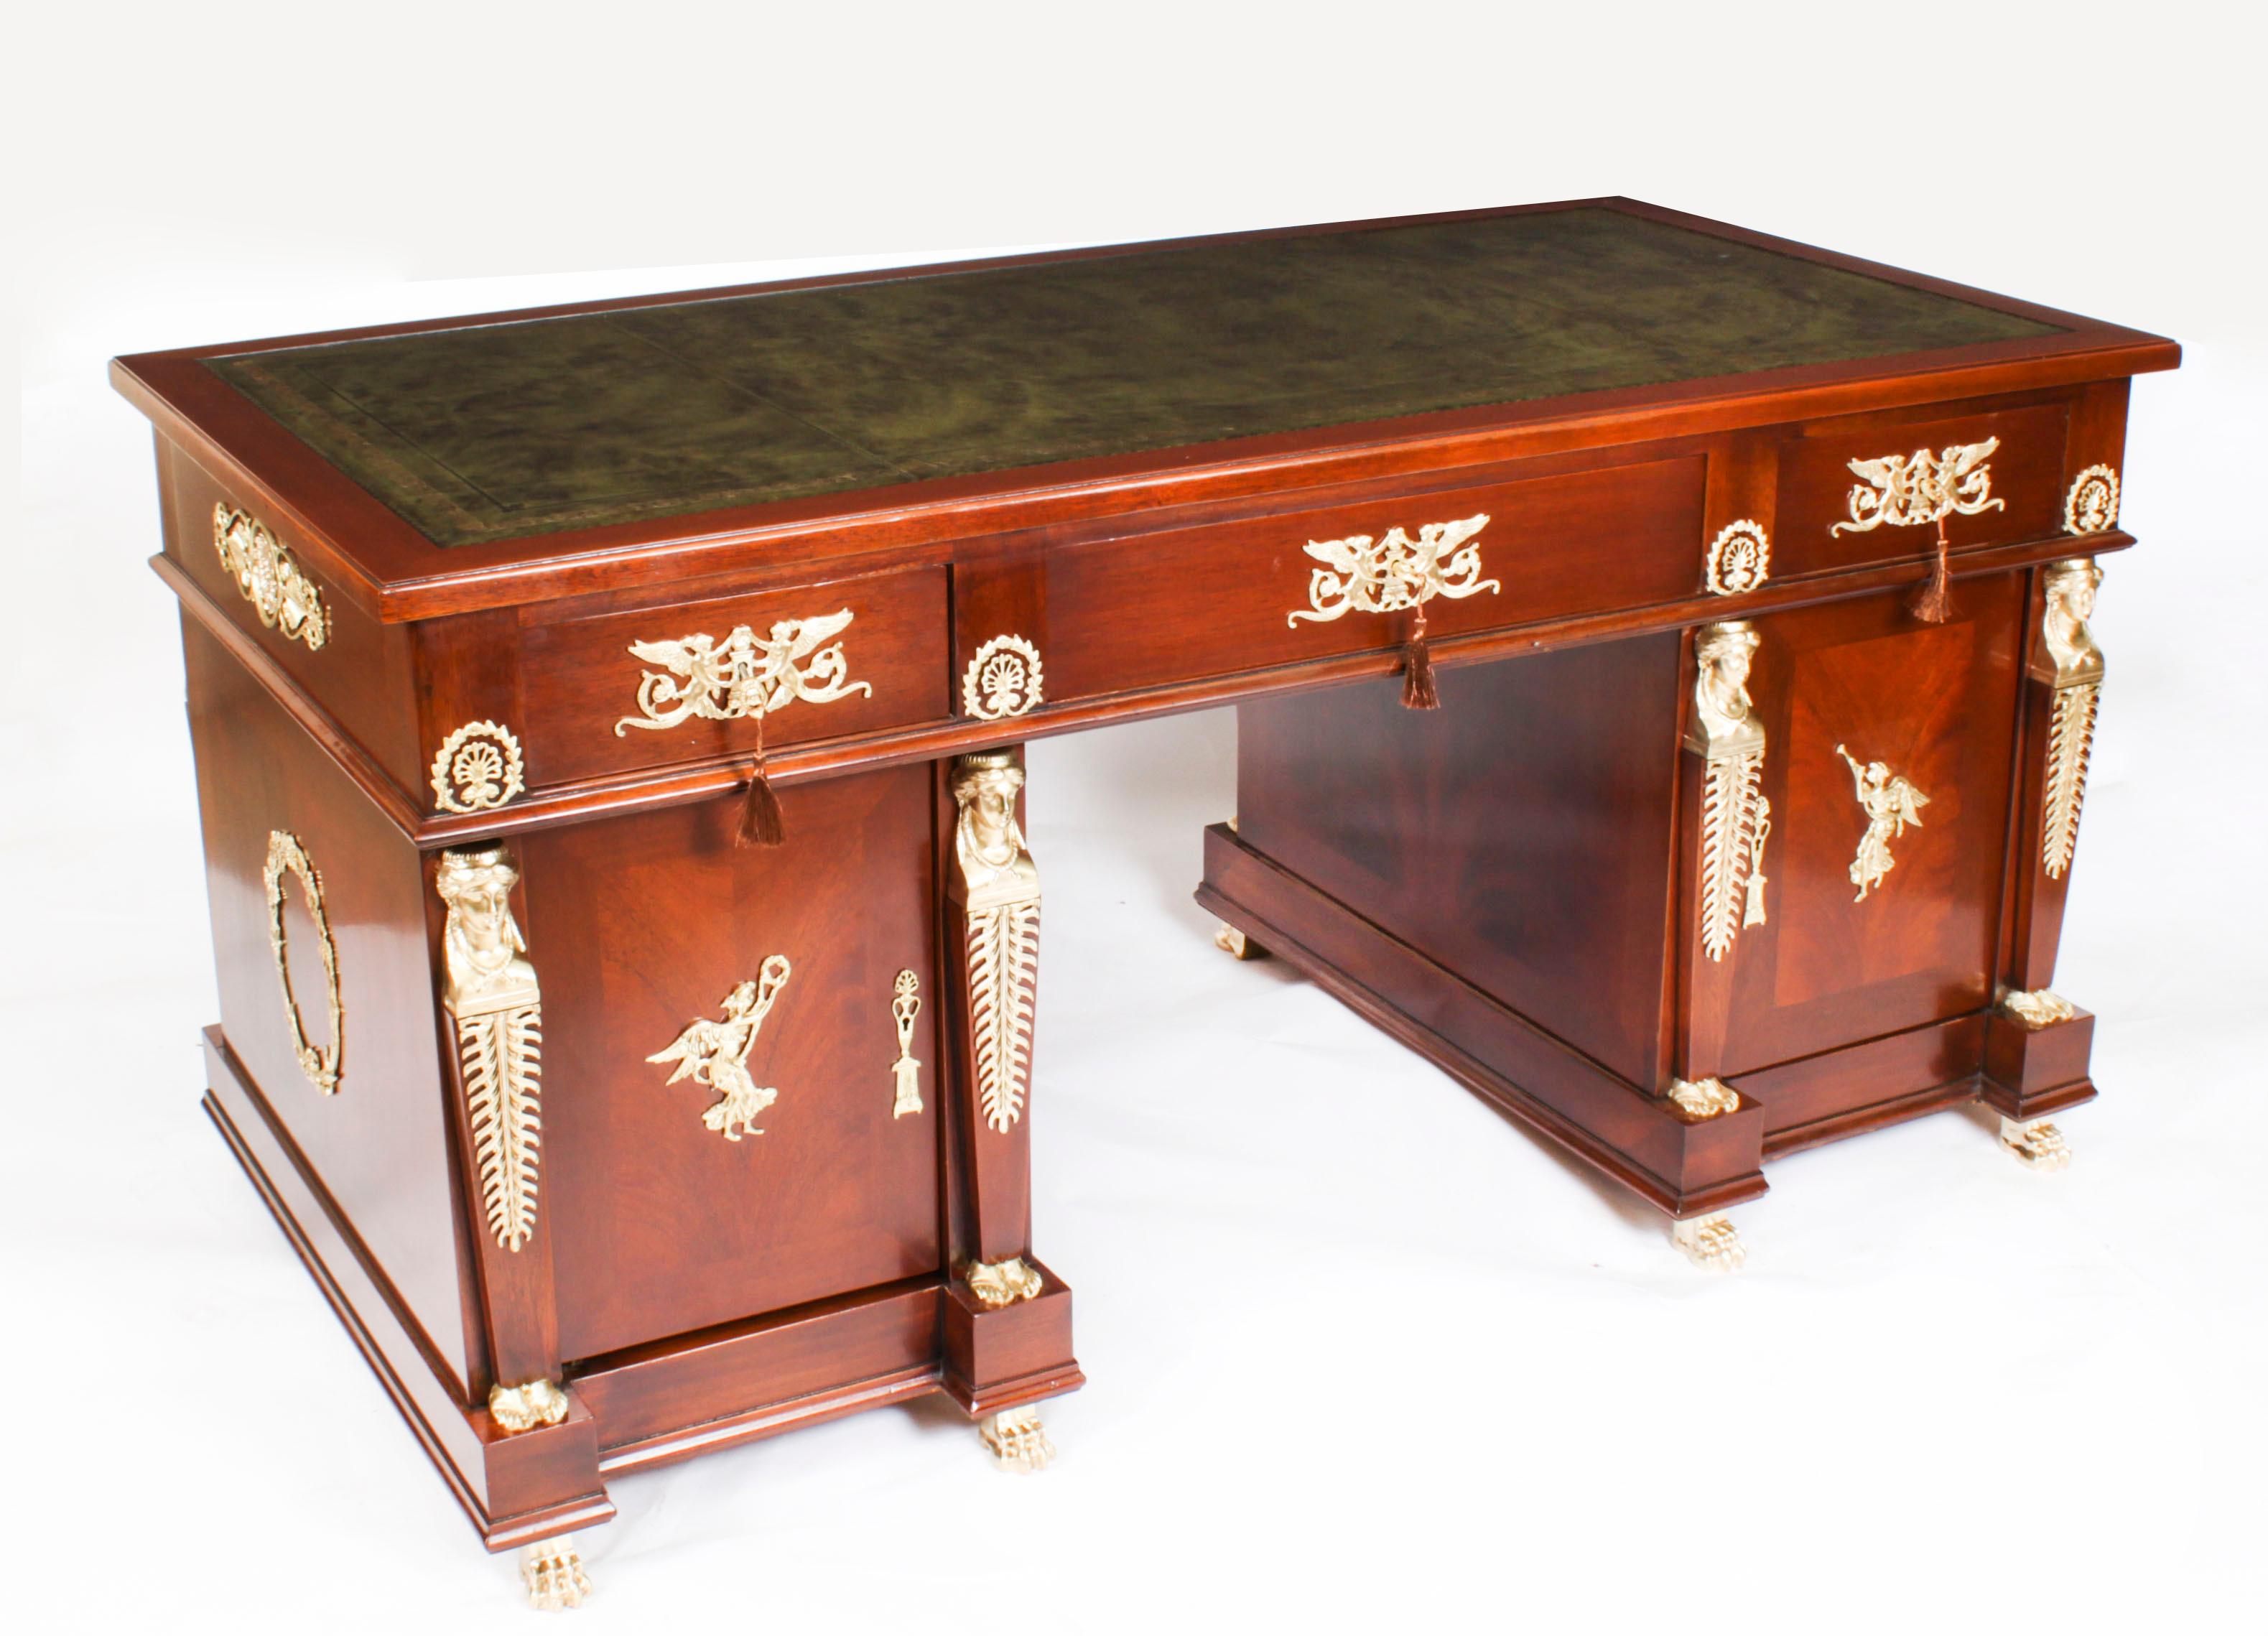 A superb Napoleon III Ormolu Mounted Empire mahogany pedestal desk and armchair set, circa 1880 in date.
 
This imposing Empire Revival pedestal desk is mounted with fine ormolu neo-classical mounts including rosettes, escutcheons and palmettes.
